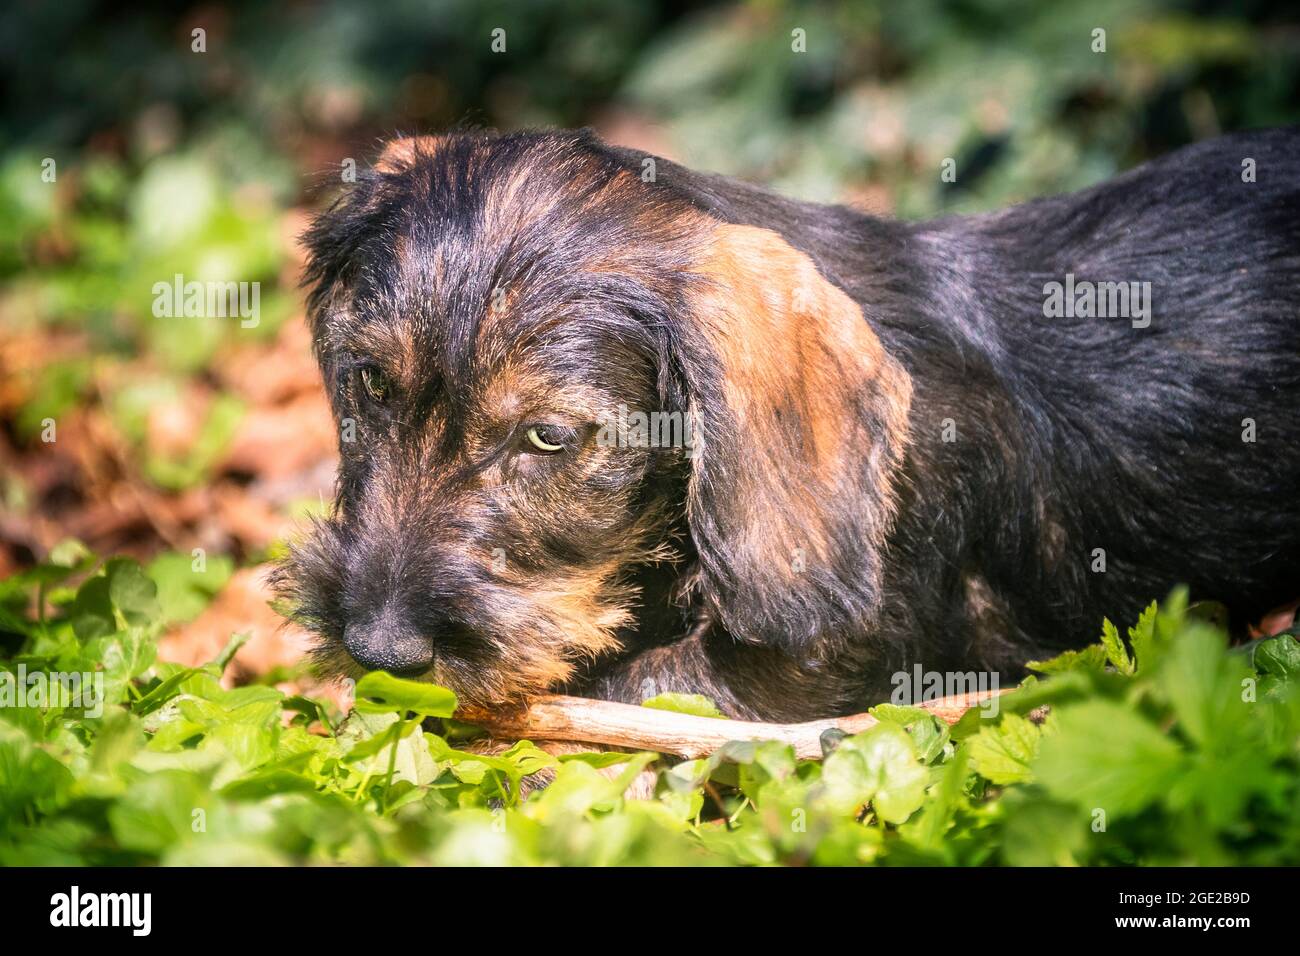 Wire-haired Dachshund. Puppy (3 month old) guarding its stick. Germany Stock Photo